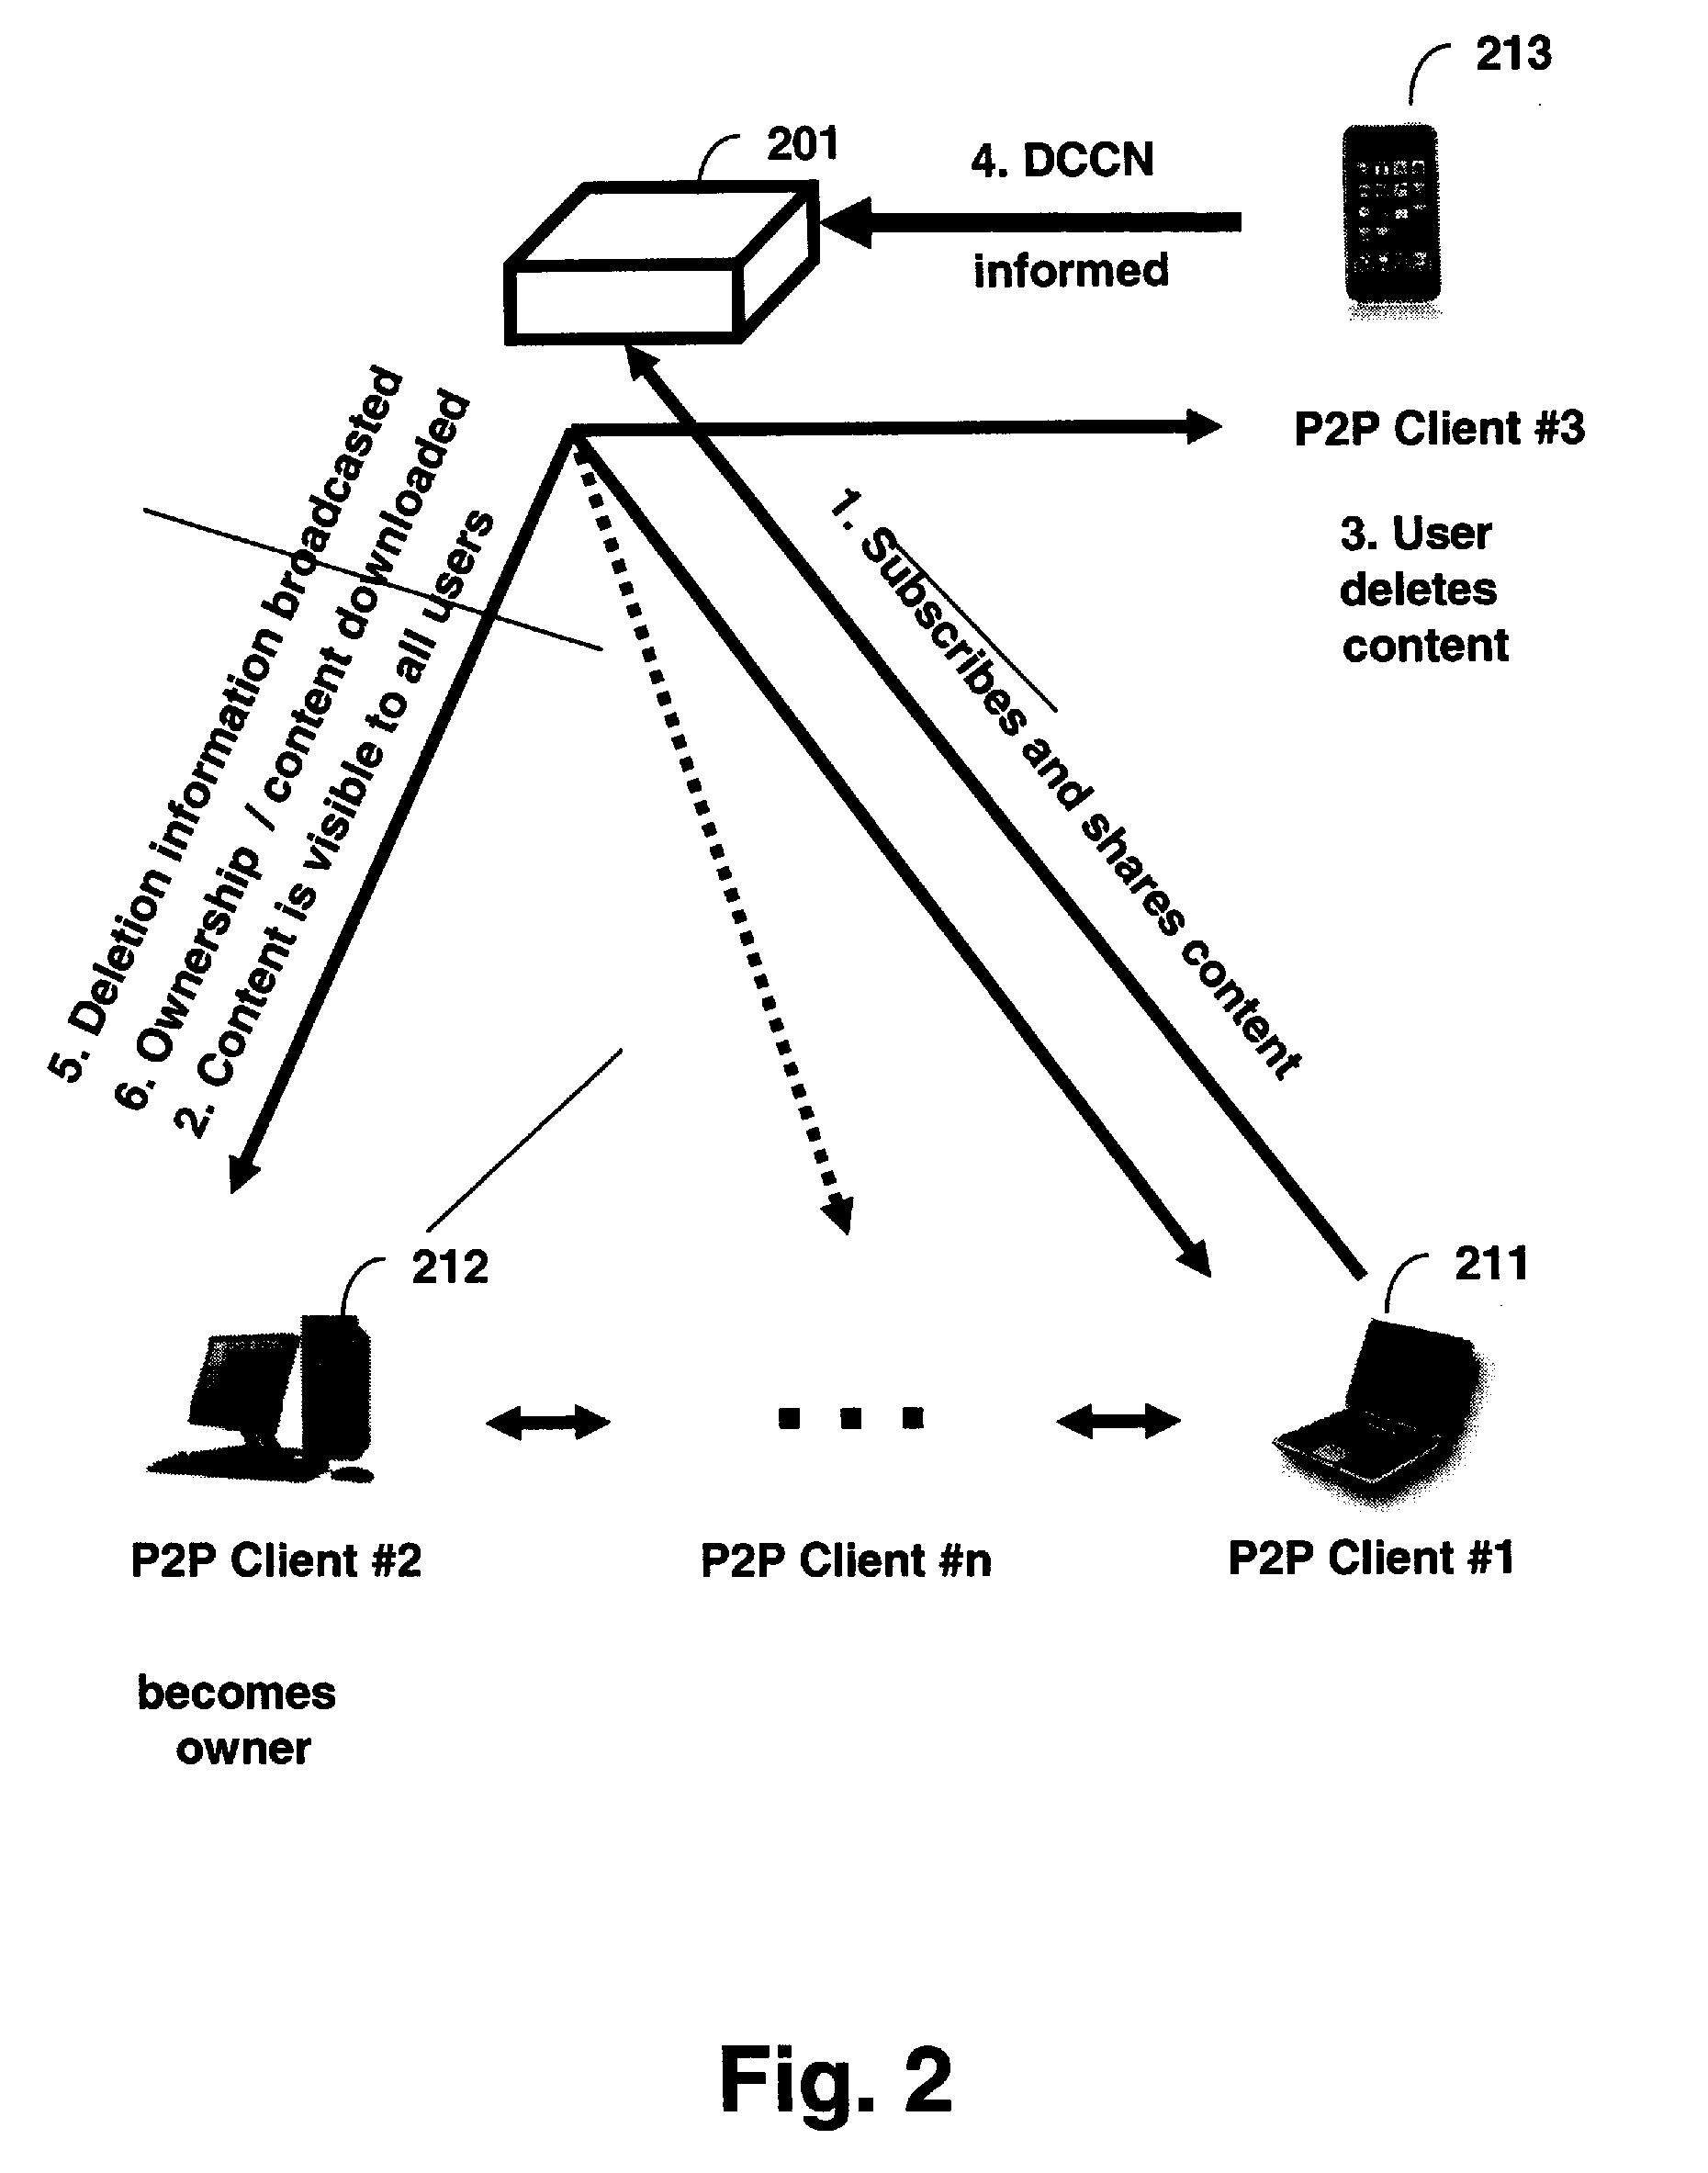 Method and System of Administrating a Peer-to-Peer File Sharing Network